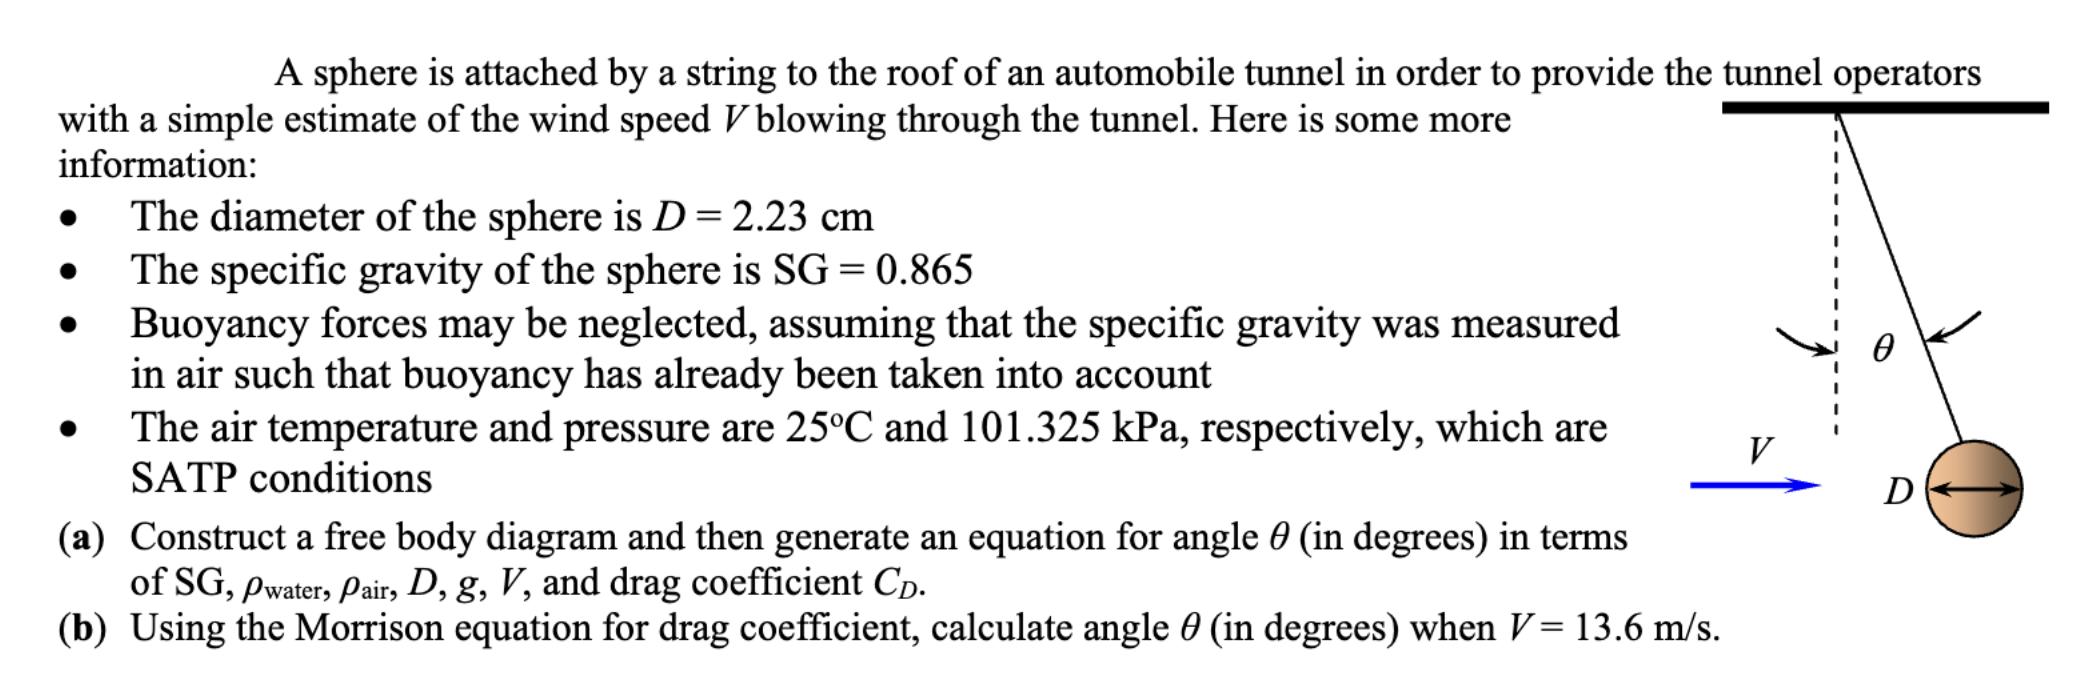 A sphere is attached by a string to the roof of an automobile tunnel in order to provide the tunnel operators